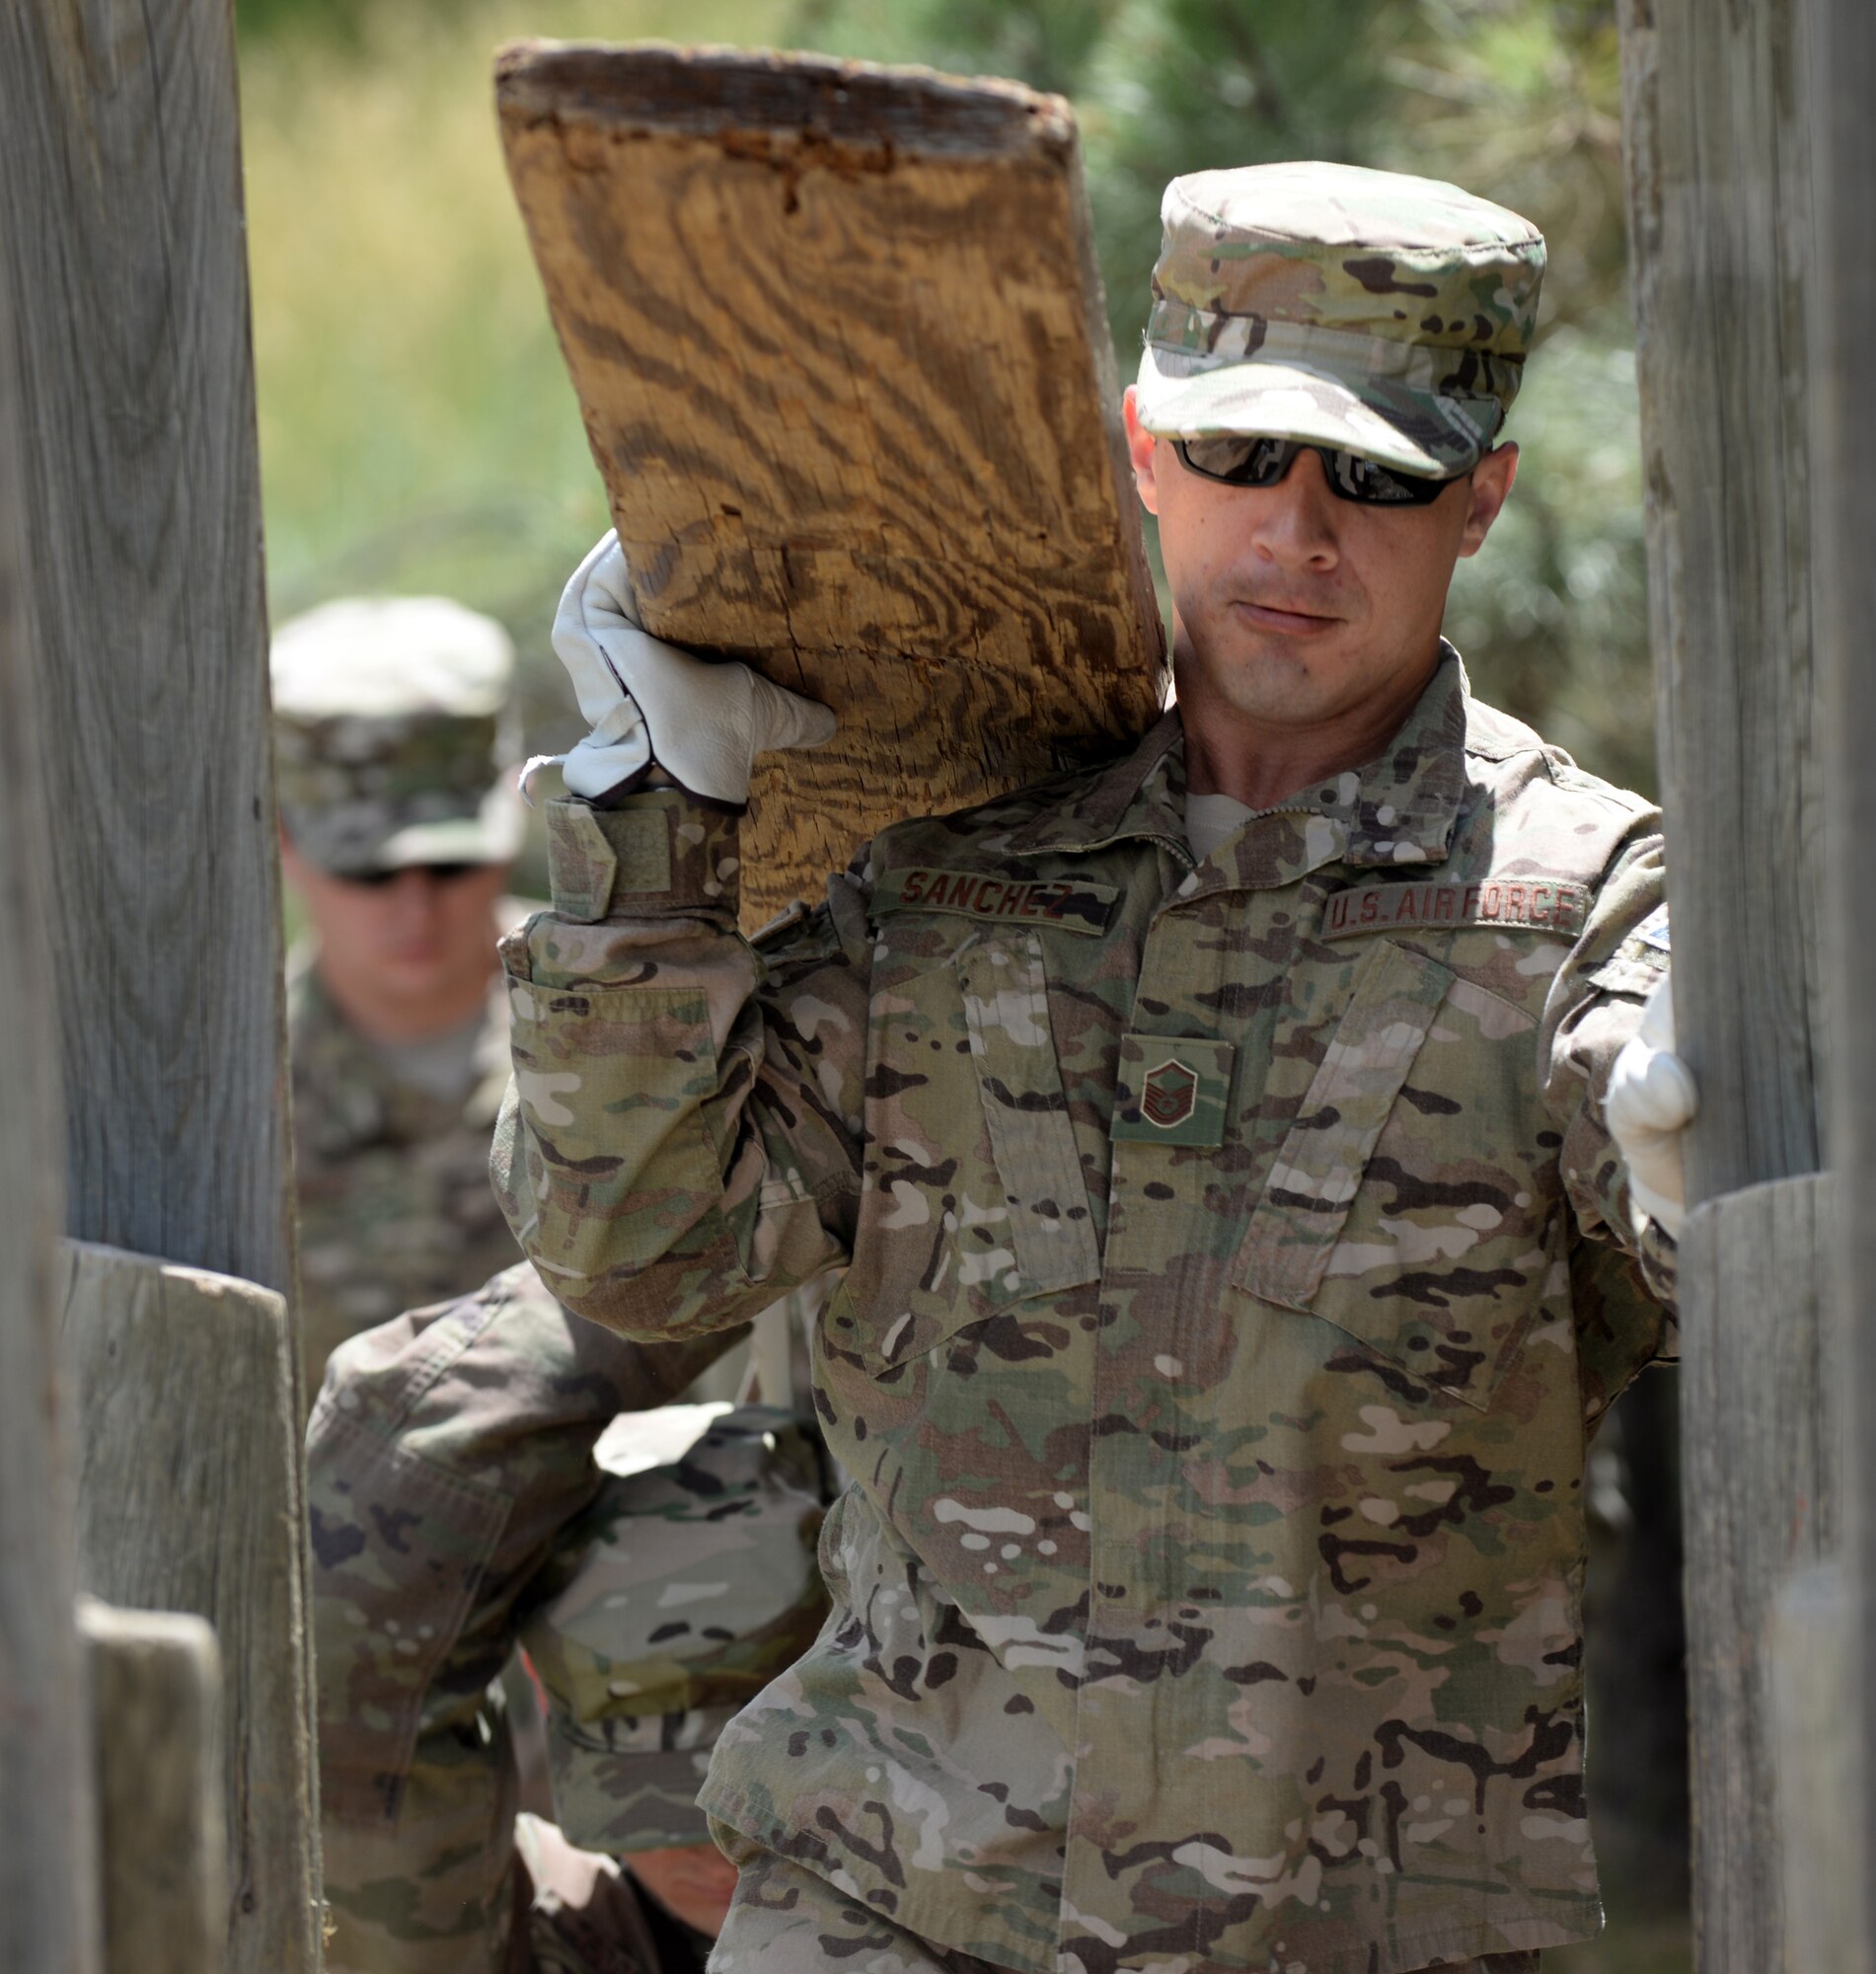 Master Sgt. Carlos Sanchez, an explosive ordnance disposal technician assigned to the 28th Civil Engineer Squadron, carries a wood board to construct a makeshift bridge during at the Leadership Reaction Course at Camp Rapid, Rapid City, South Dakota, June 14, 2017. The LRC training is designed to build teamwork and leadership skills through completing various obstacles. (U.S. Air Force photo by Airman 1st Class Thomas I. Karol)